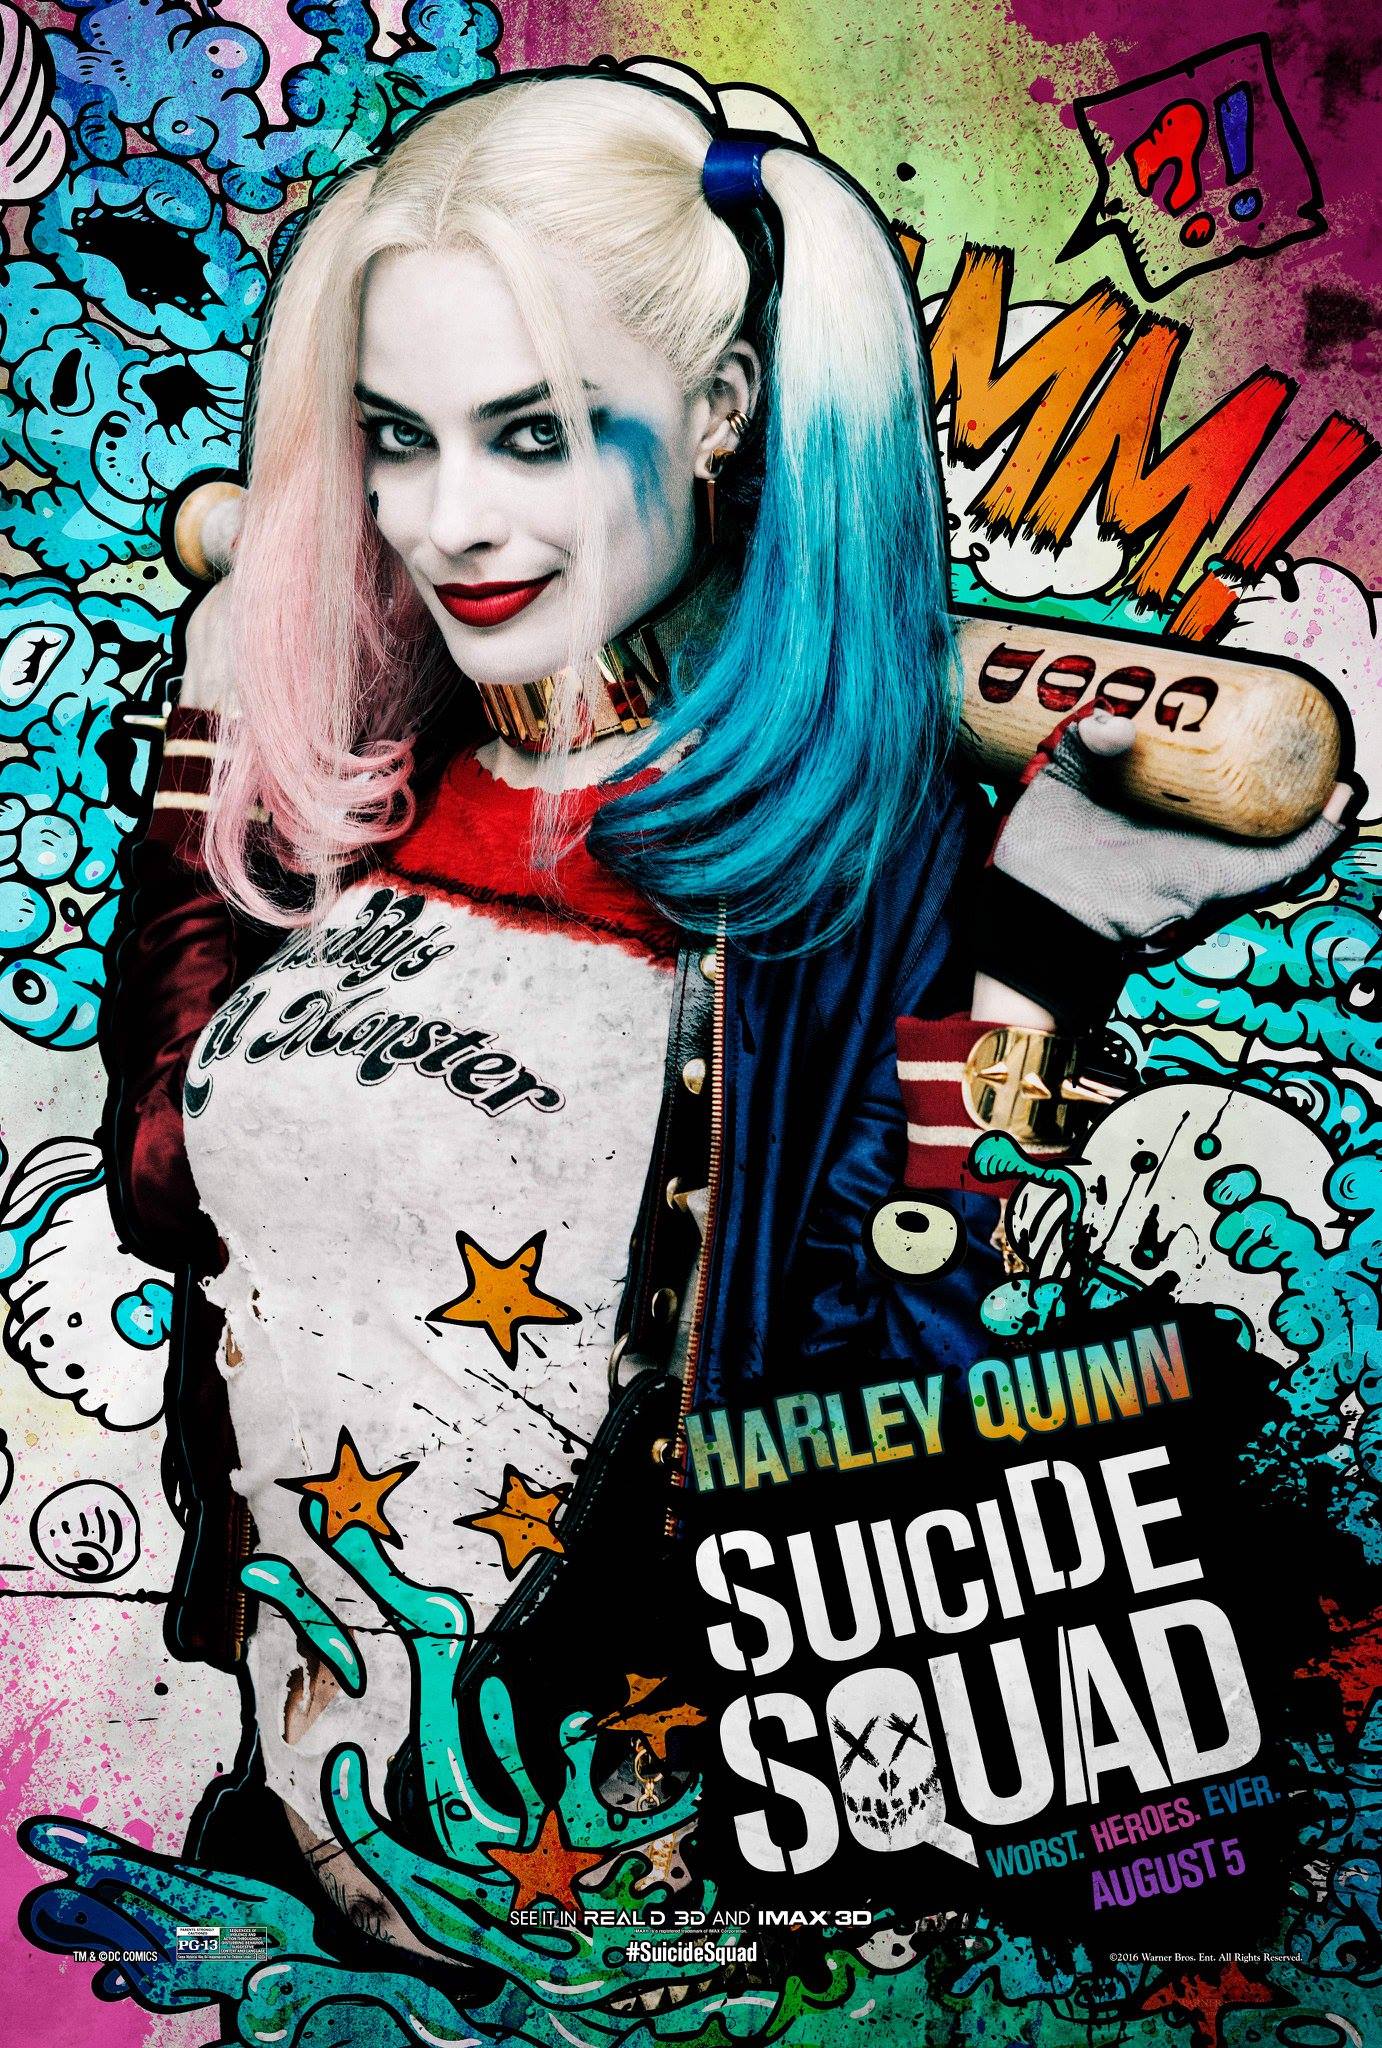 Nice Images Collection: Suicide Squad Desktop Wallpapers